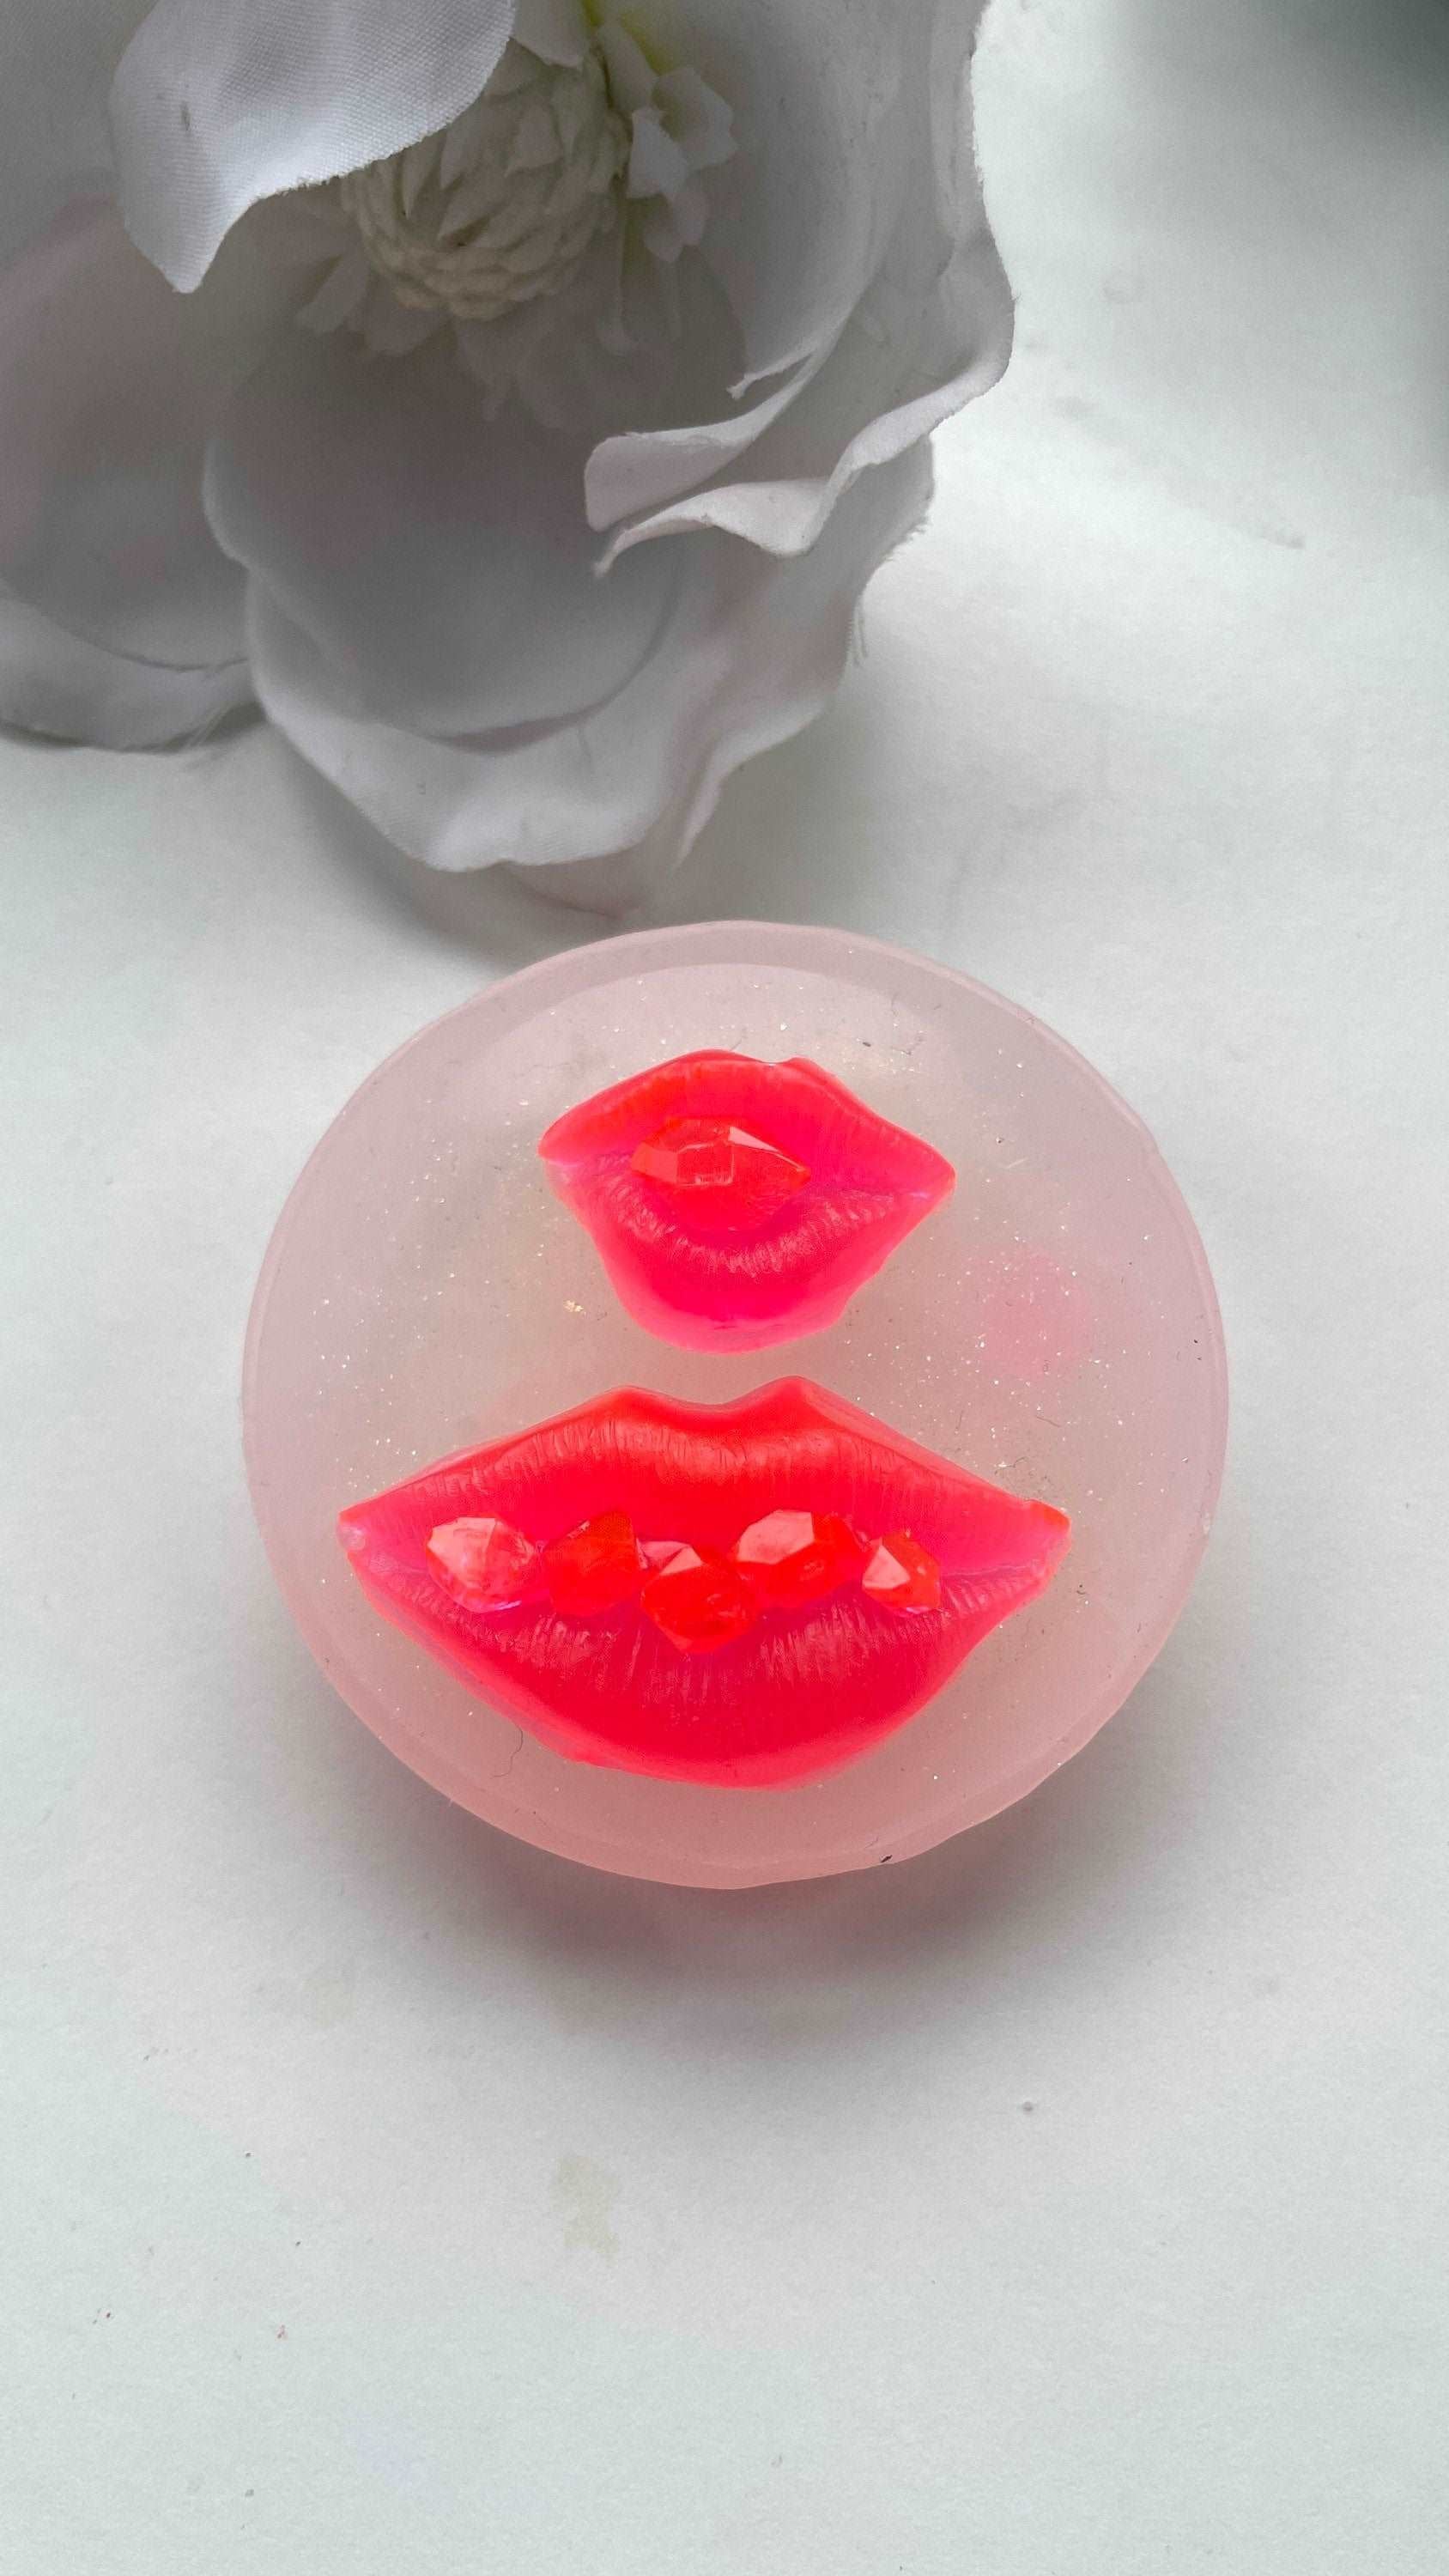 2 Set Lips with crystals Silicone Mold Epoxy Resin Mold Jewelry Making DIY Kissing mold with crystals Aesthetic form resin crystalline molds